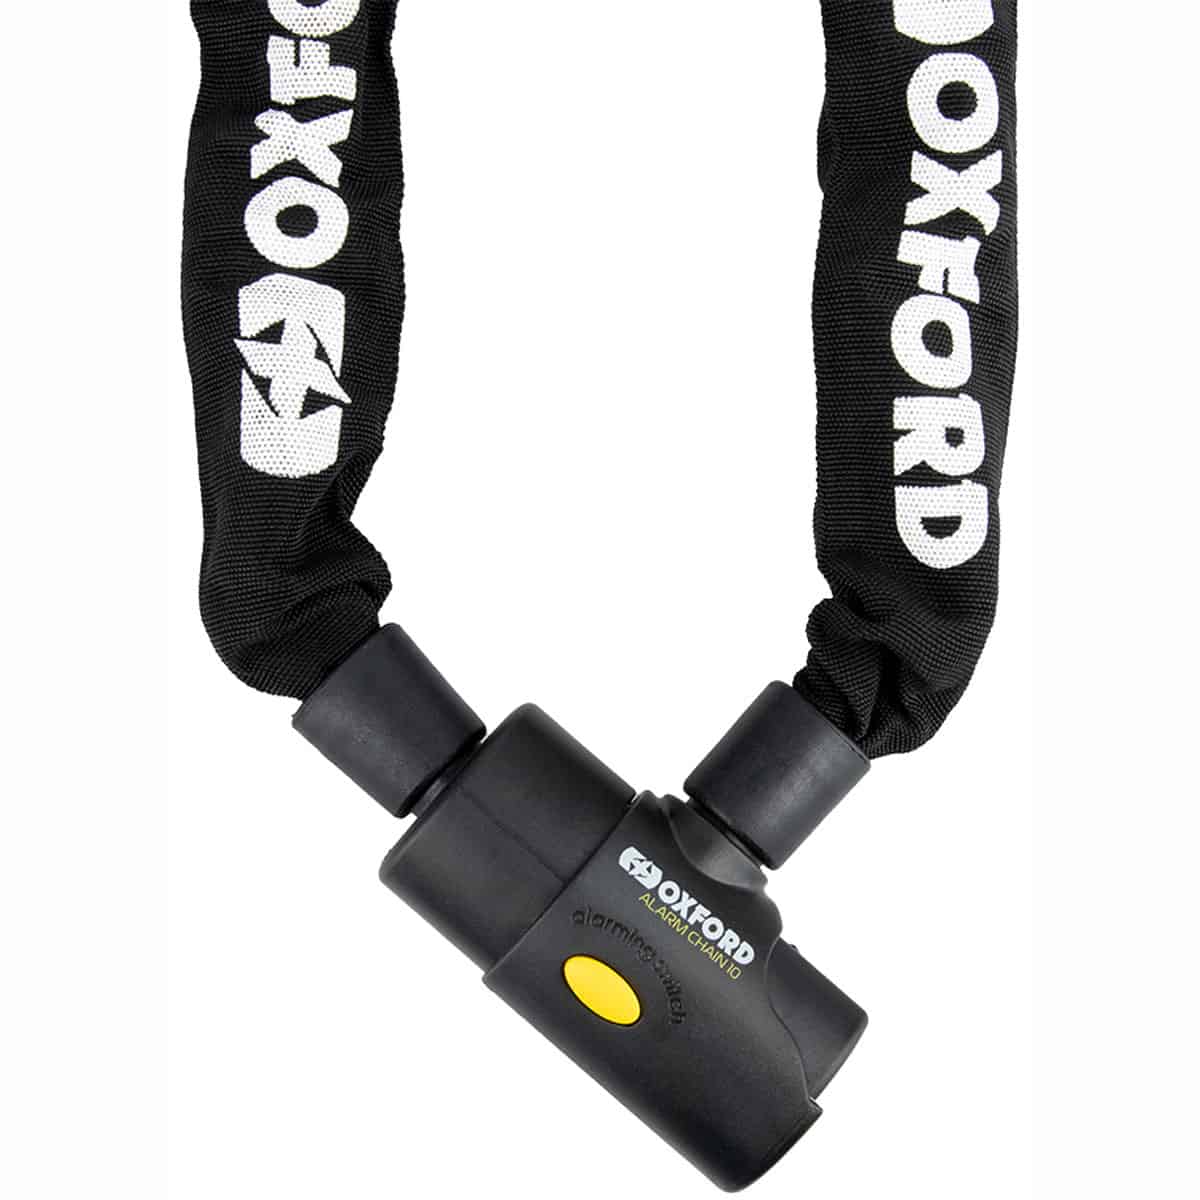 Introducing the Oxford Alarm Chain 10, the security solution to keep your bike and valuable items safe.